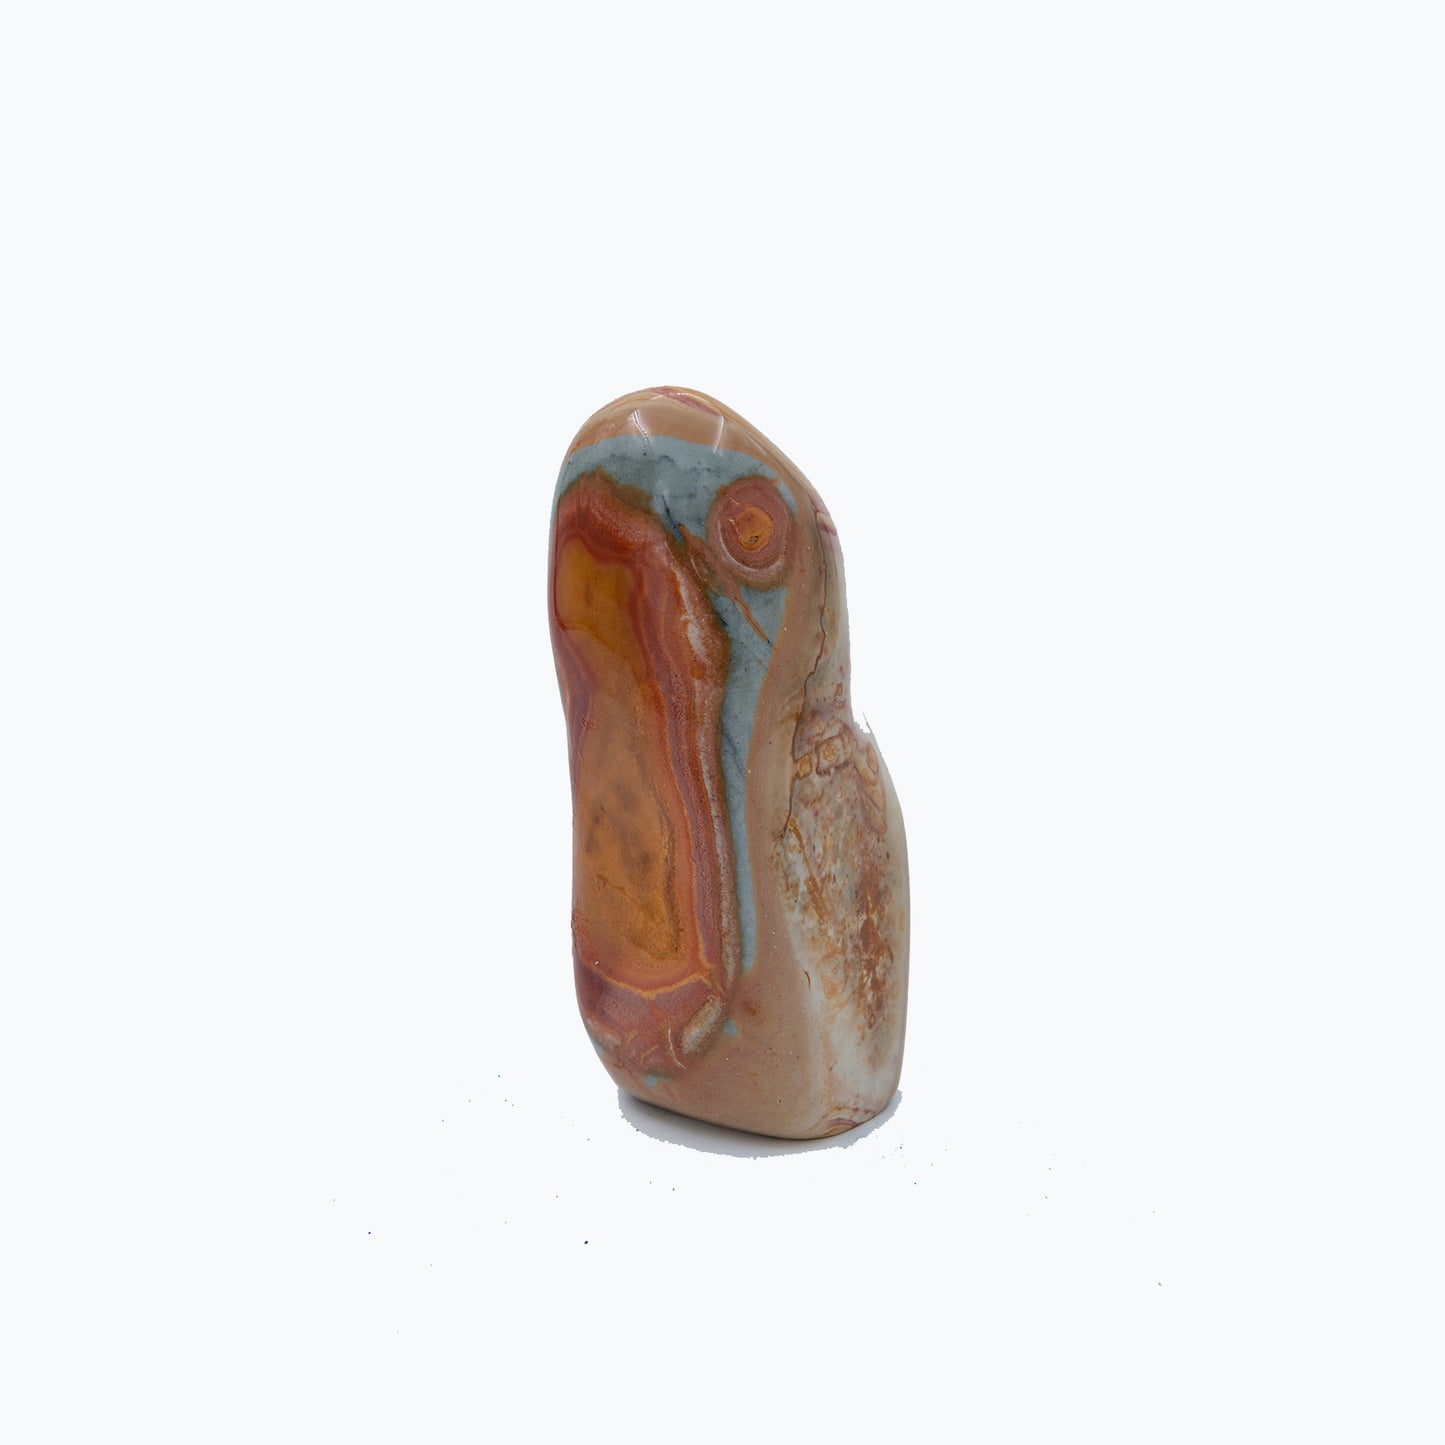 Madagascar Polychrome Jasper.   Vividly colored and wildly patterned.  Size: 8 inches tall by 3 inches wide.  Metaphysical lore says Polychrome Jasper is a stone of grounding, strength and enhancing your ability to access your inner knowledge